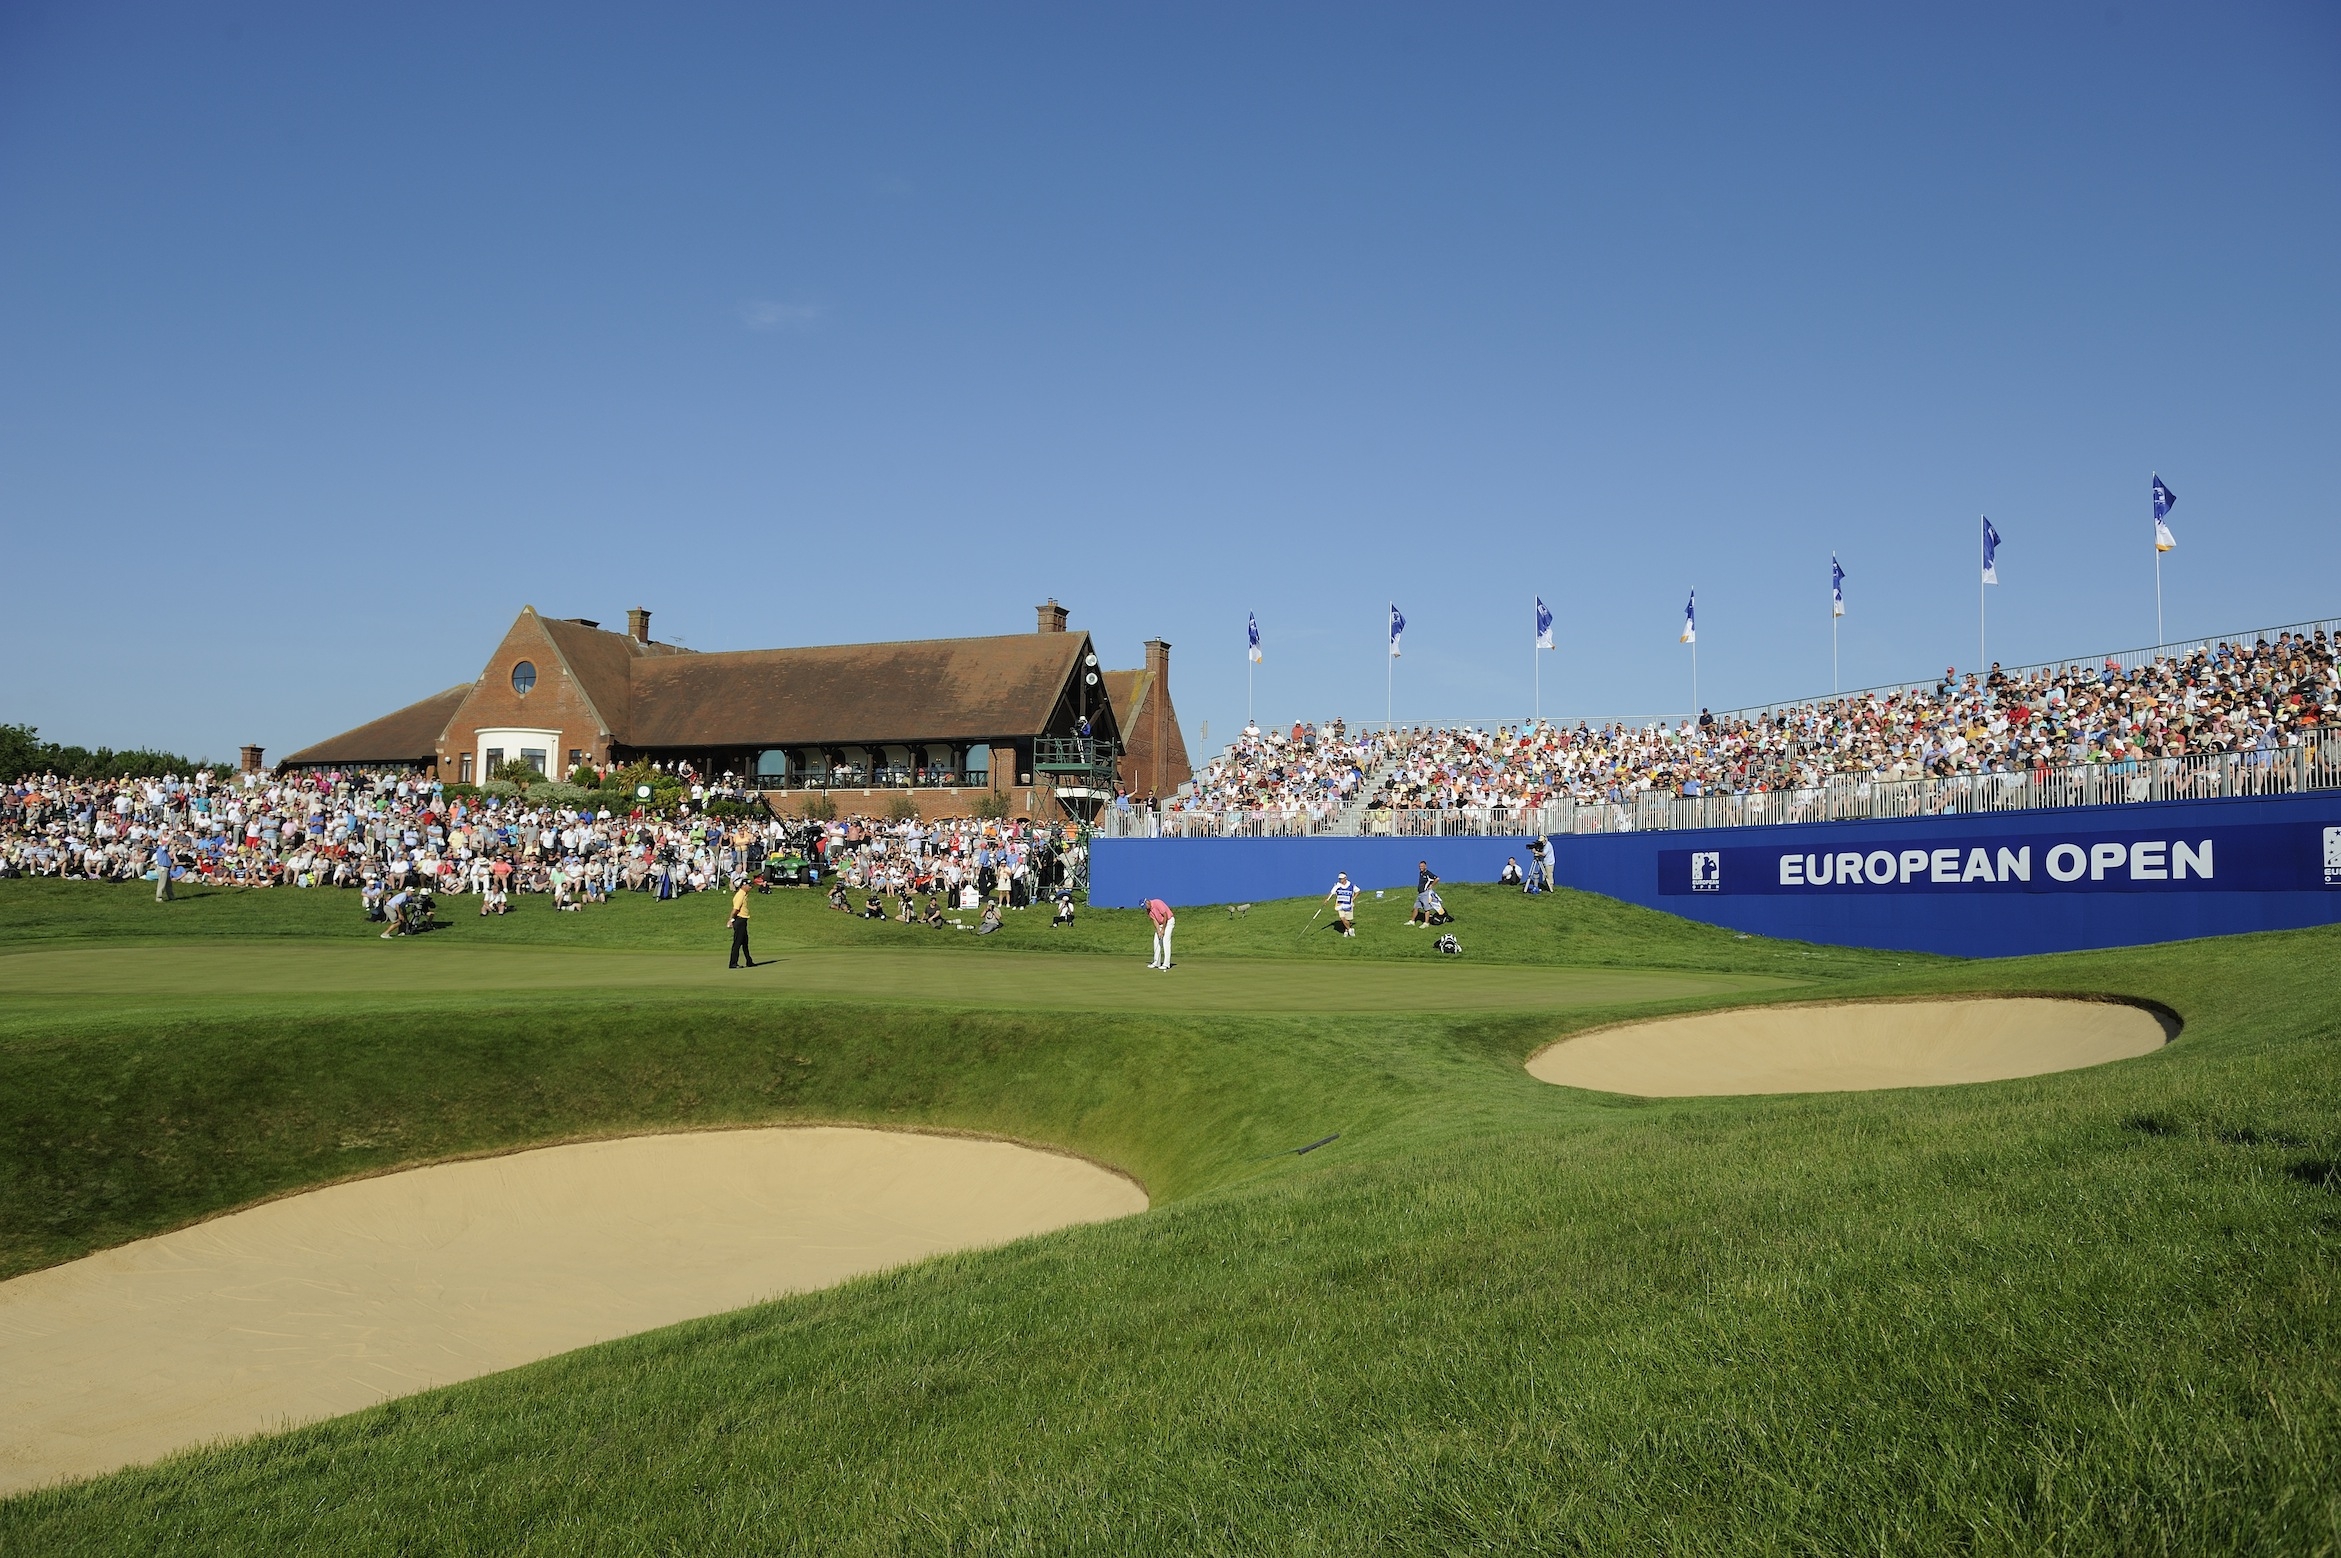 The European Open was held on The Heritage Course in 2008 and 2009